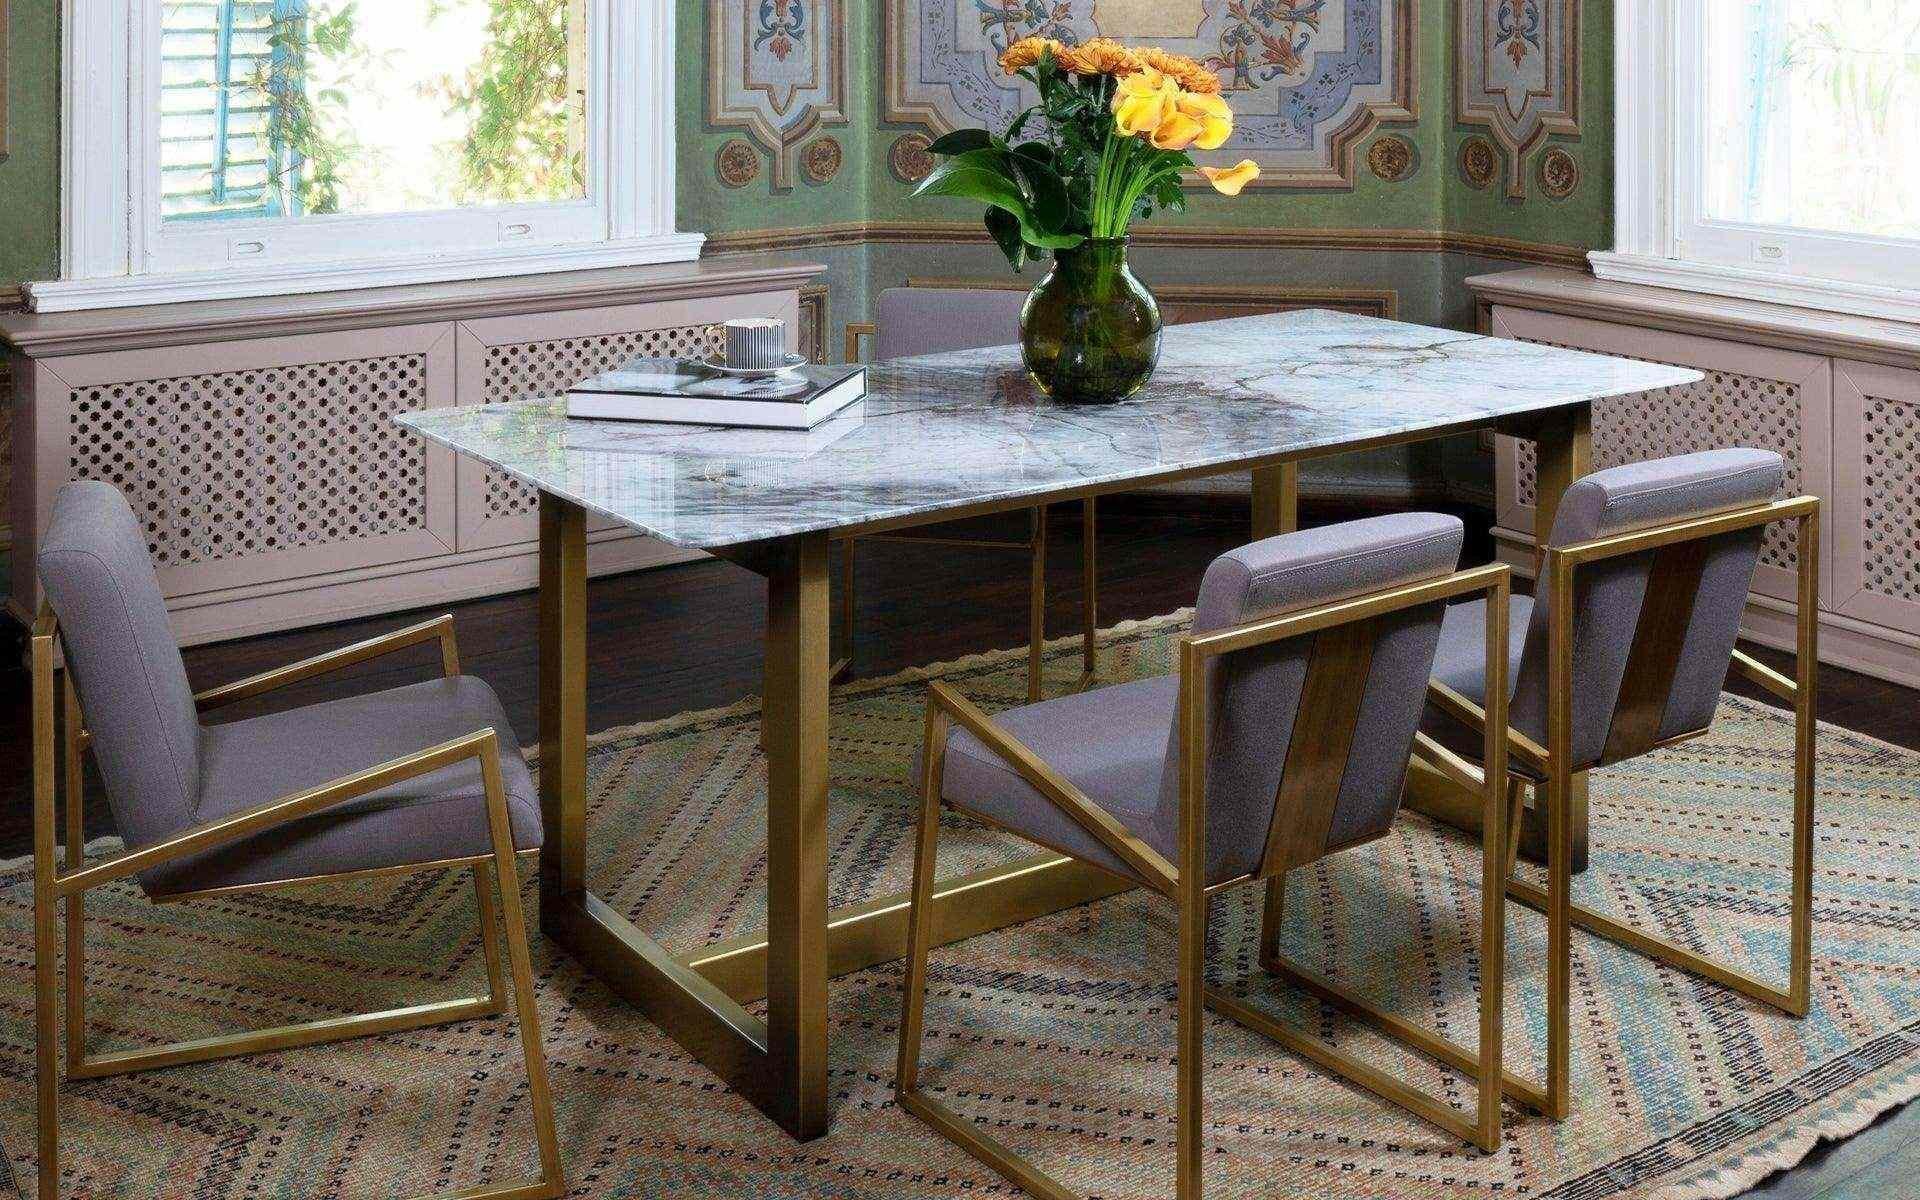 A complete complement to the rubik cube design with their chairs, the FAMED table will take the lead in your dining area. The model, which will be the address of your comfortable and rude dishes, will create a full image with its brass-detailed feet